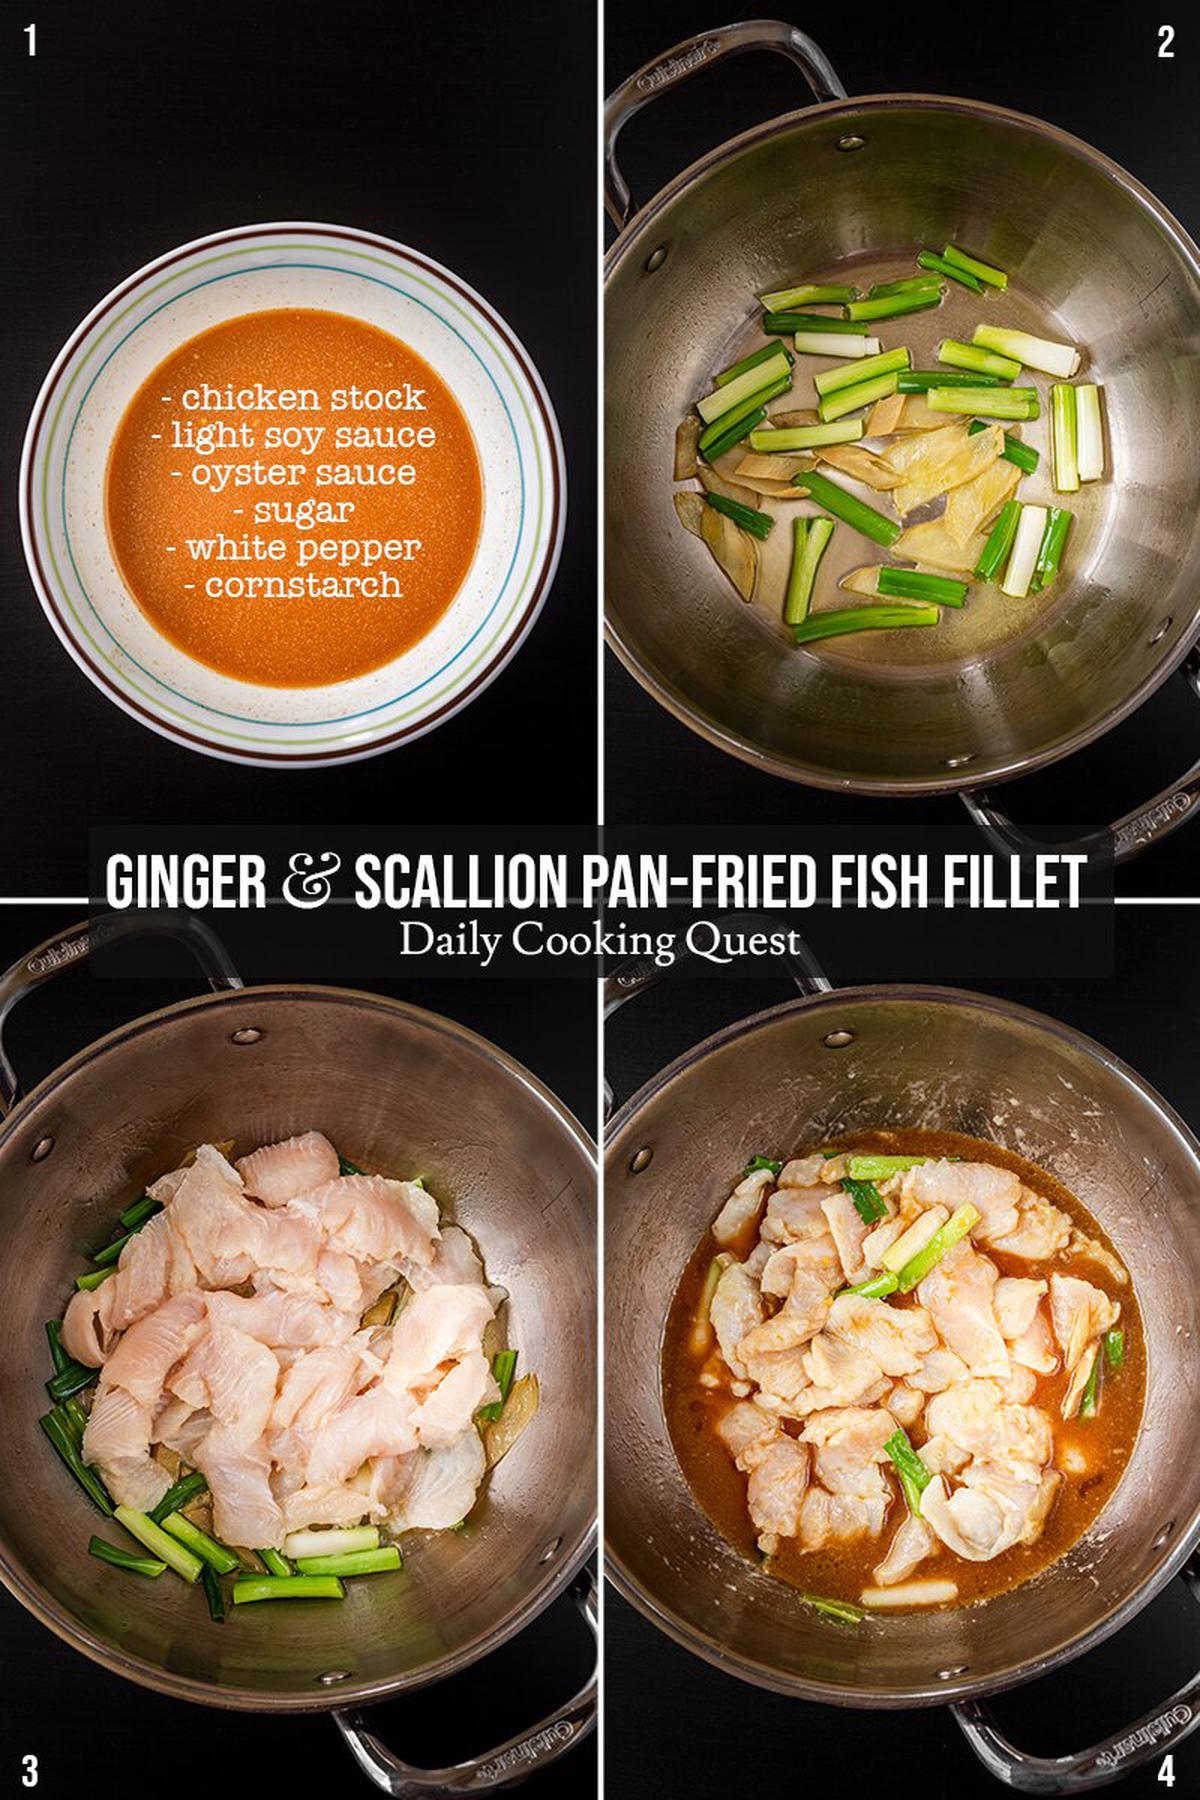 Ginger and Scallion Pan-Fried Fish Fillet | Daily Cooking Quest